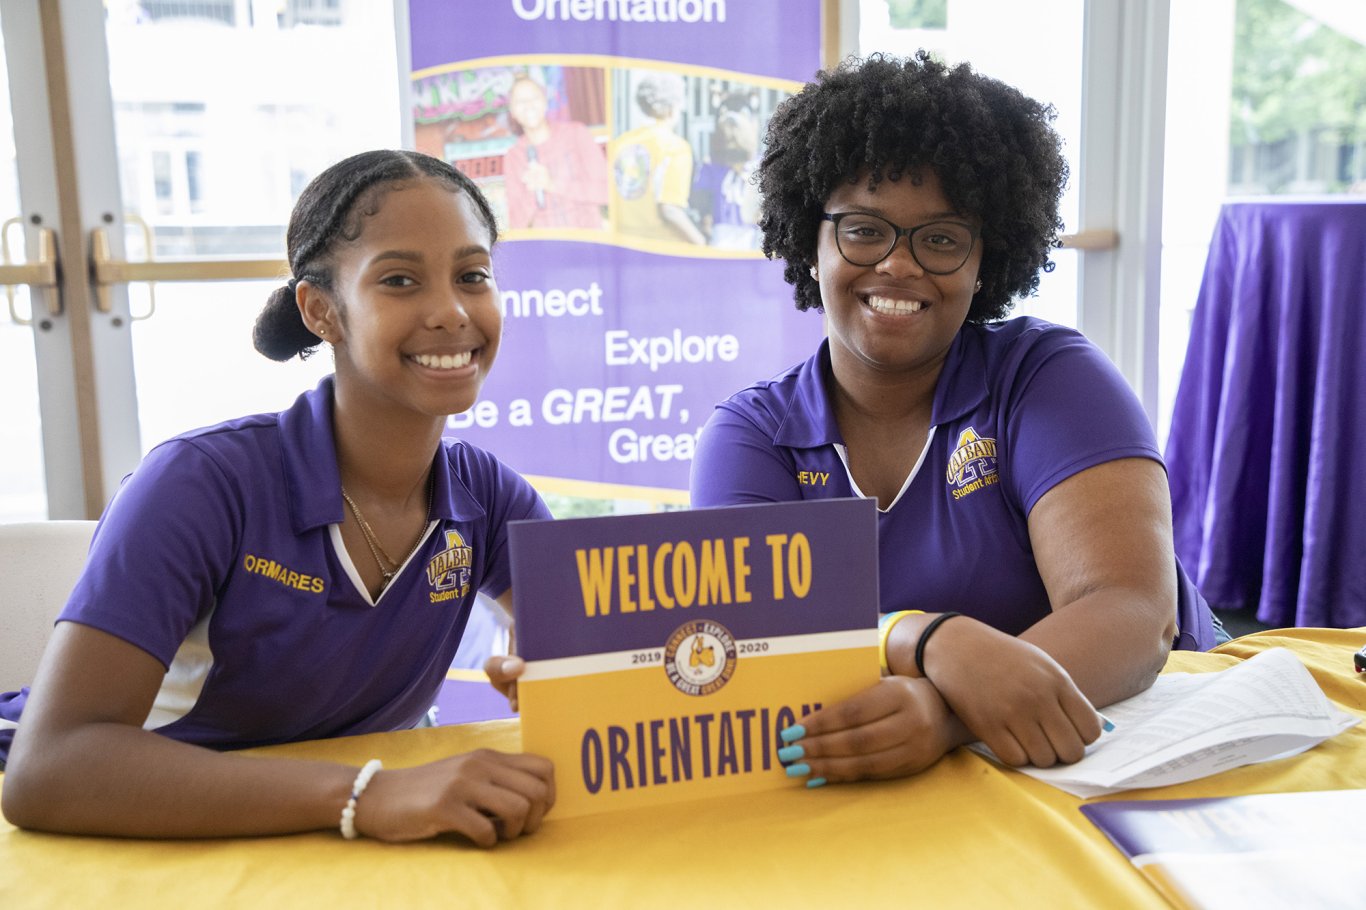 Two orientation leaders holding a 'Welcome to Orientation' sign.